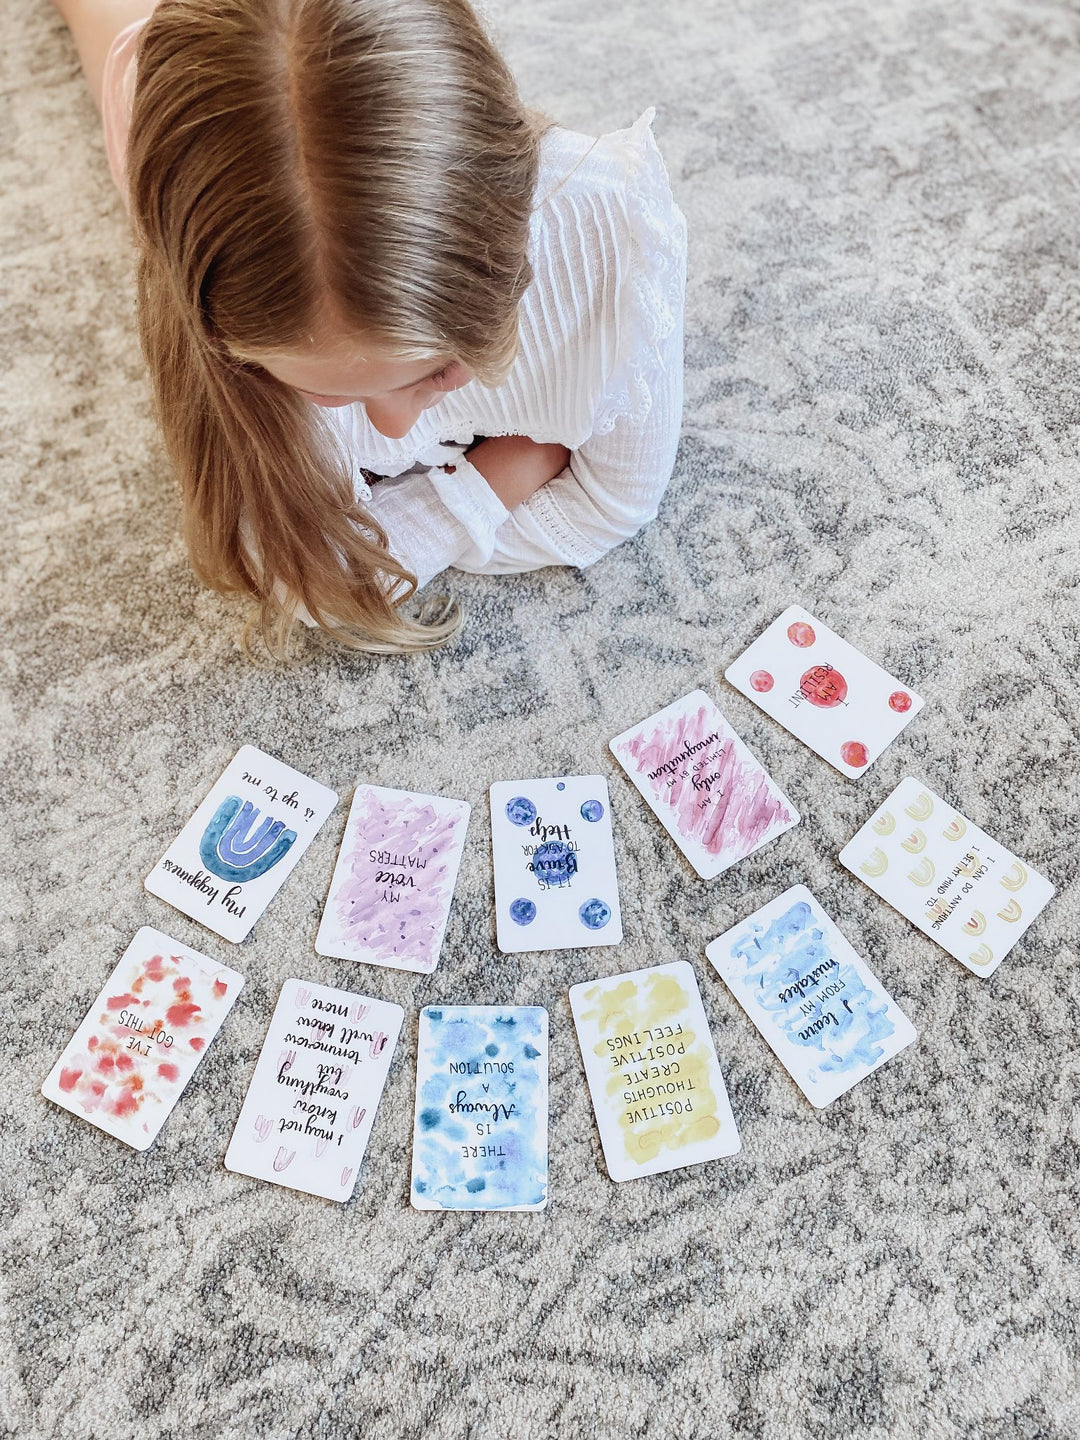 Young girl happily lying on the floor, engaged in exploring colorful, uplifting affirmation cards, promoting mental health and emotional resilience in children.